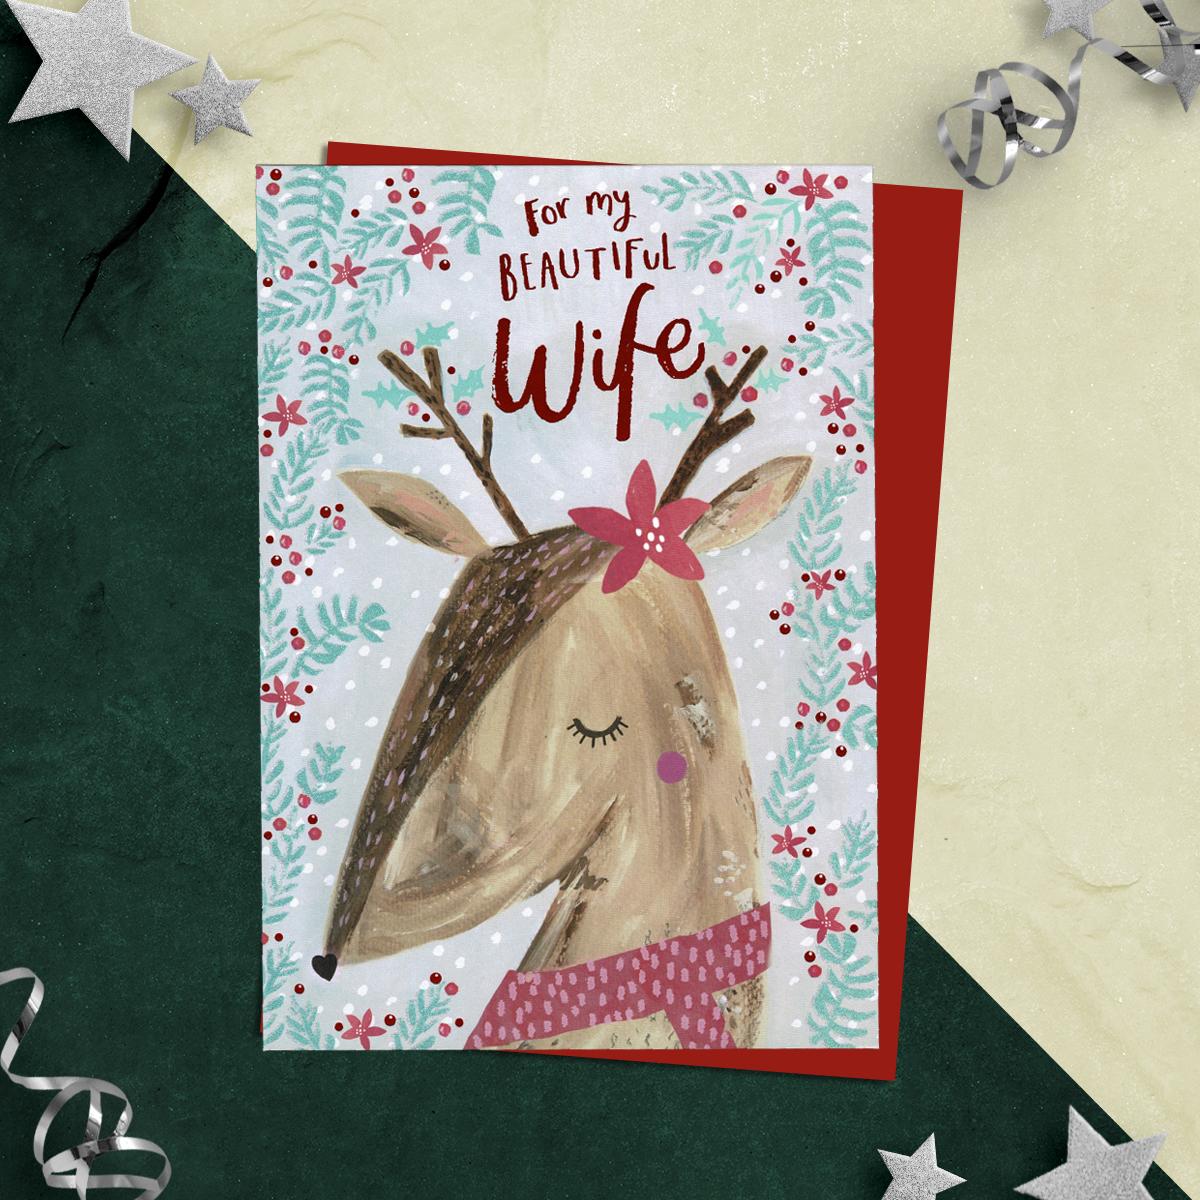 For My Beautiful Wife Featuring A Cute Whimsical Reindeer. With Added Sparkle And Red Lettering. A Red Envelope Completes This Design!